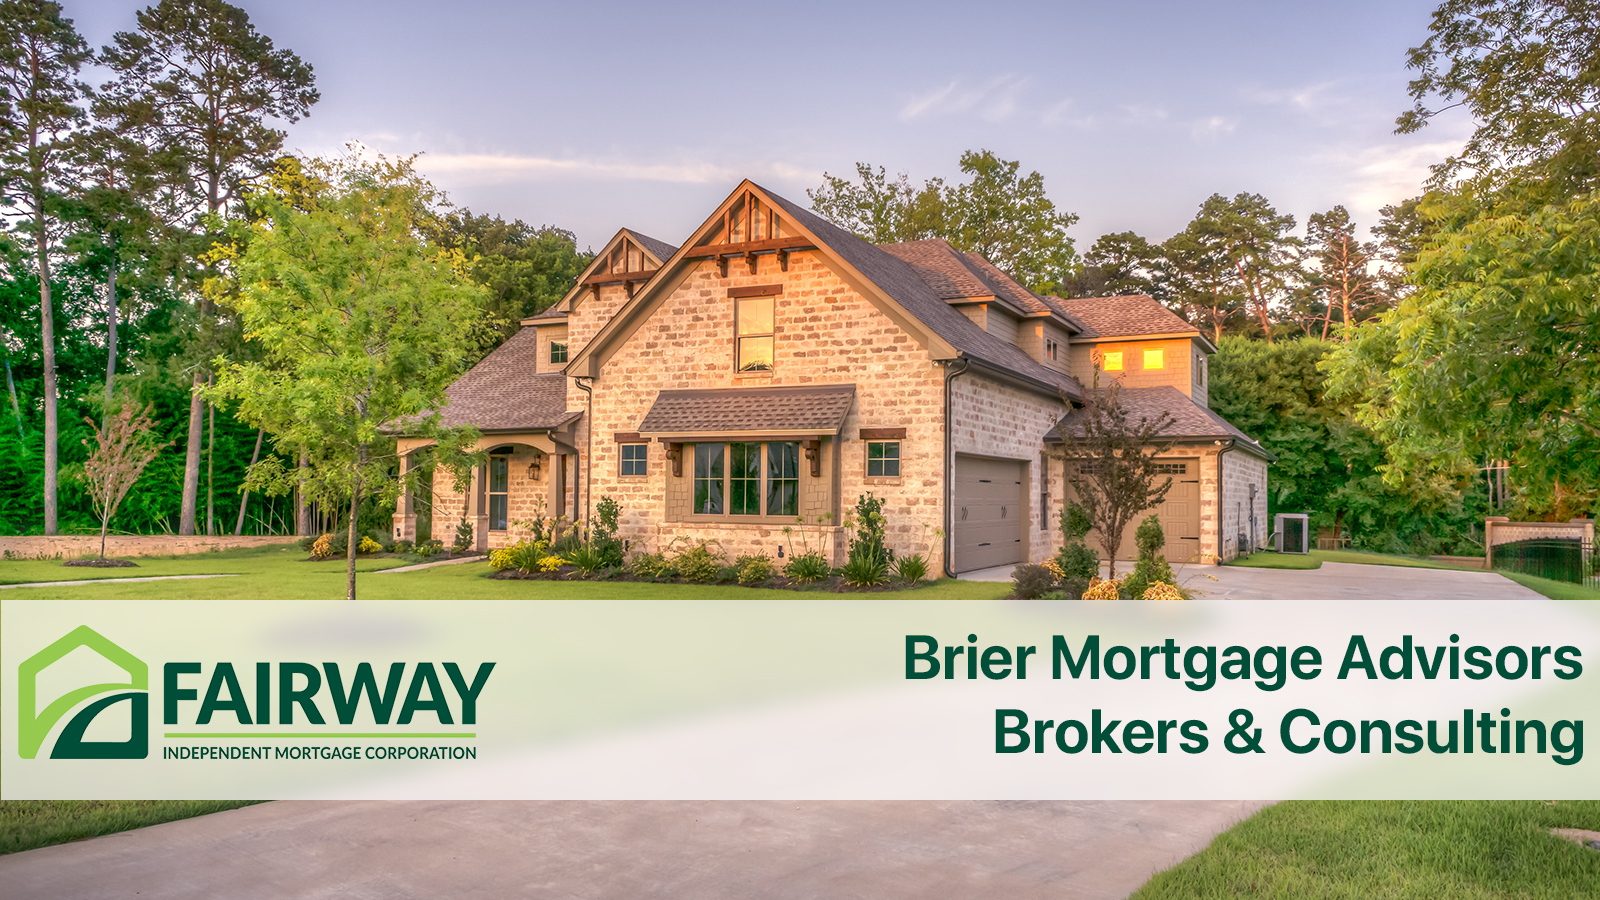 Brier-Mortgage-Advisors-Brokers-Consulting